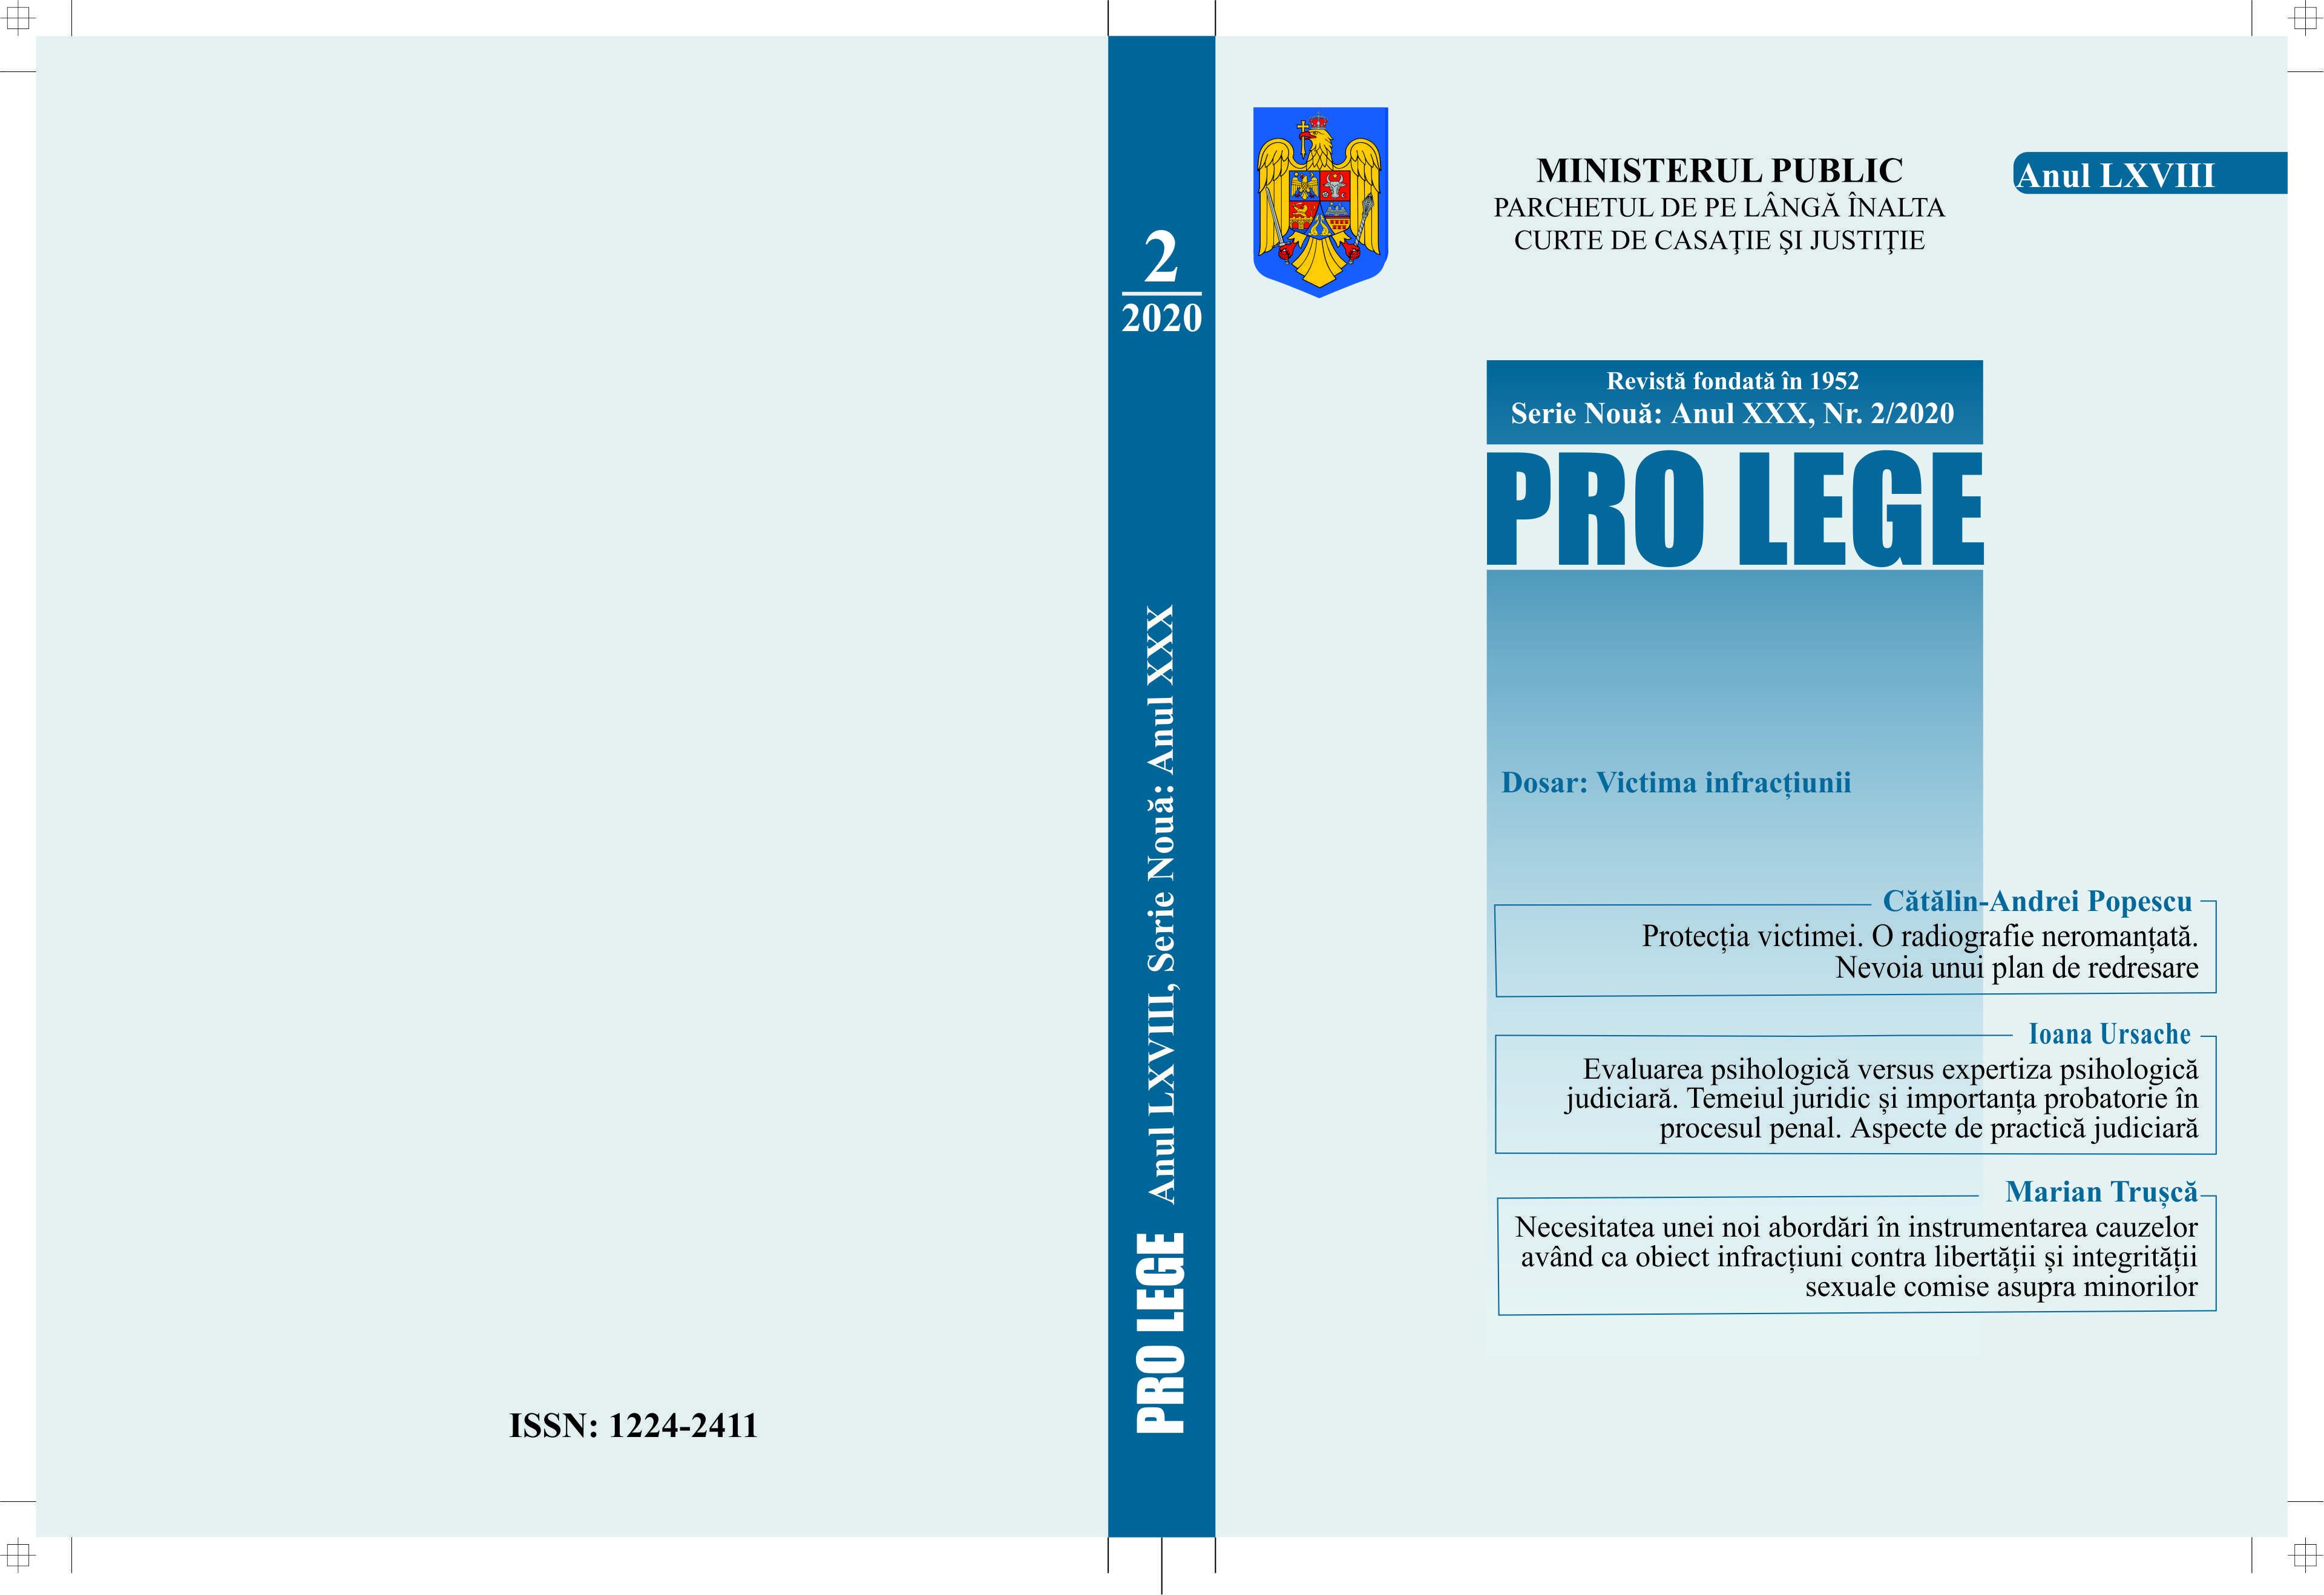 The official misconduct provided by Art. 99 let. a) of the Law no. 303/2004 on the status of judges and prosecutors. Jurisprudence Cover Image